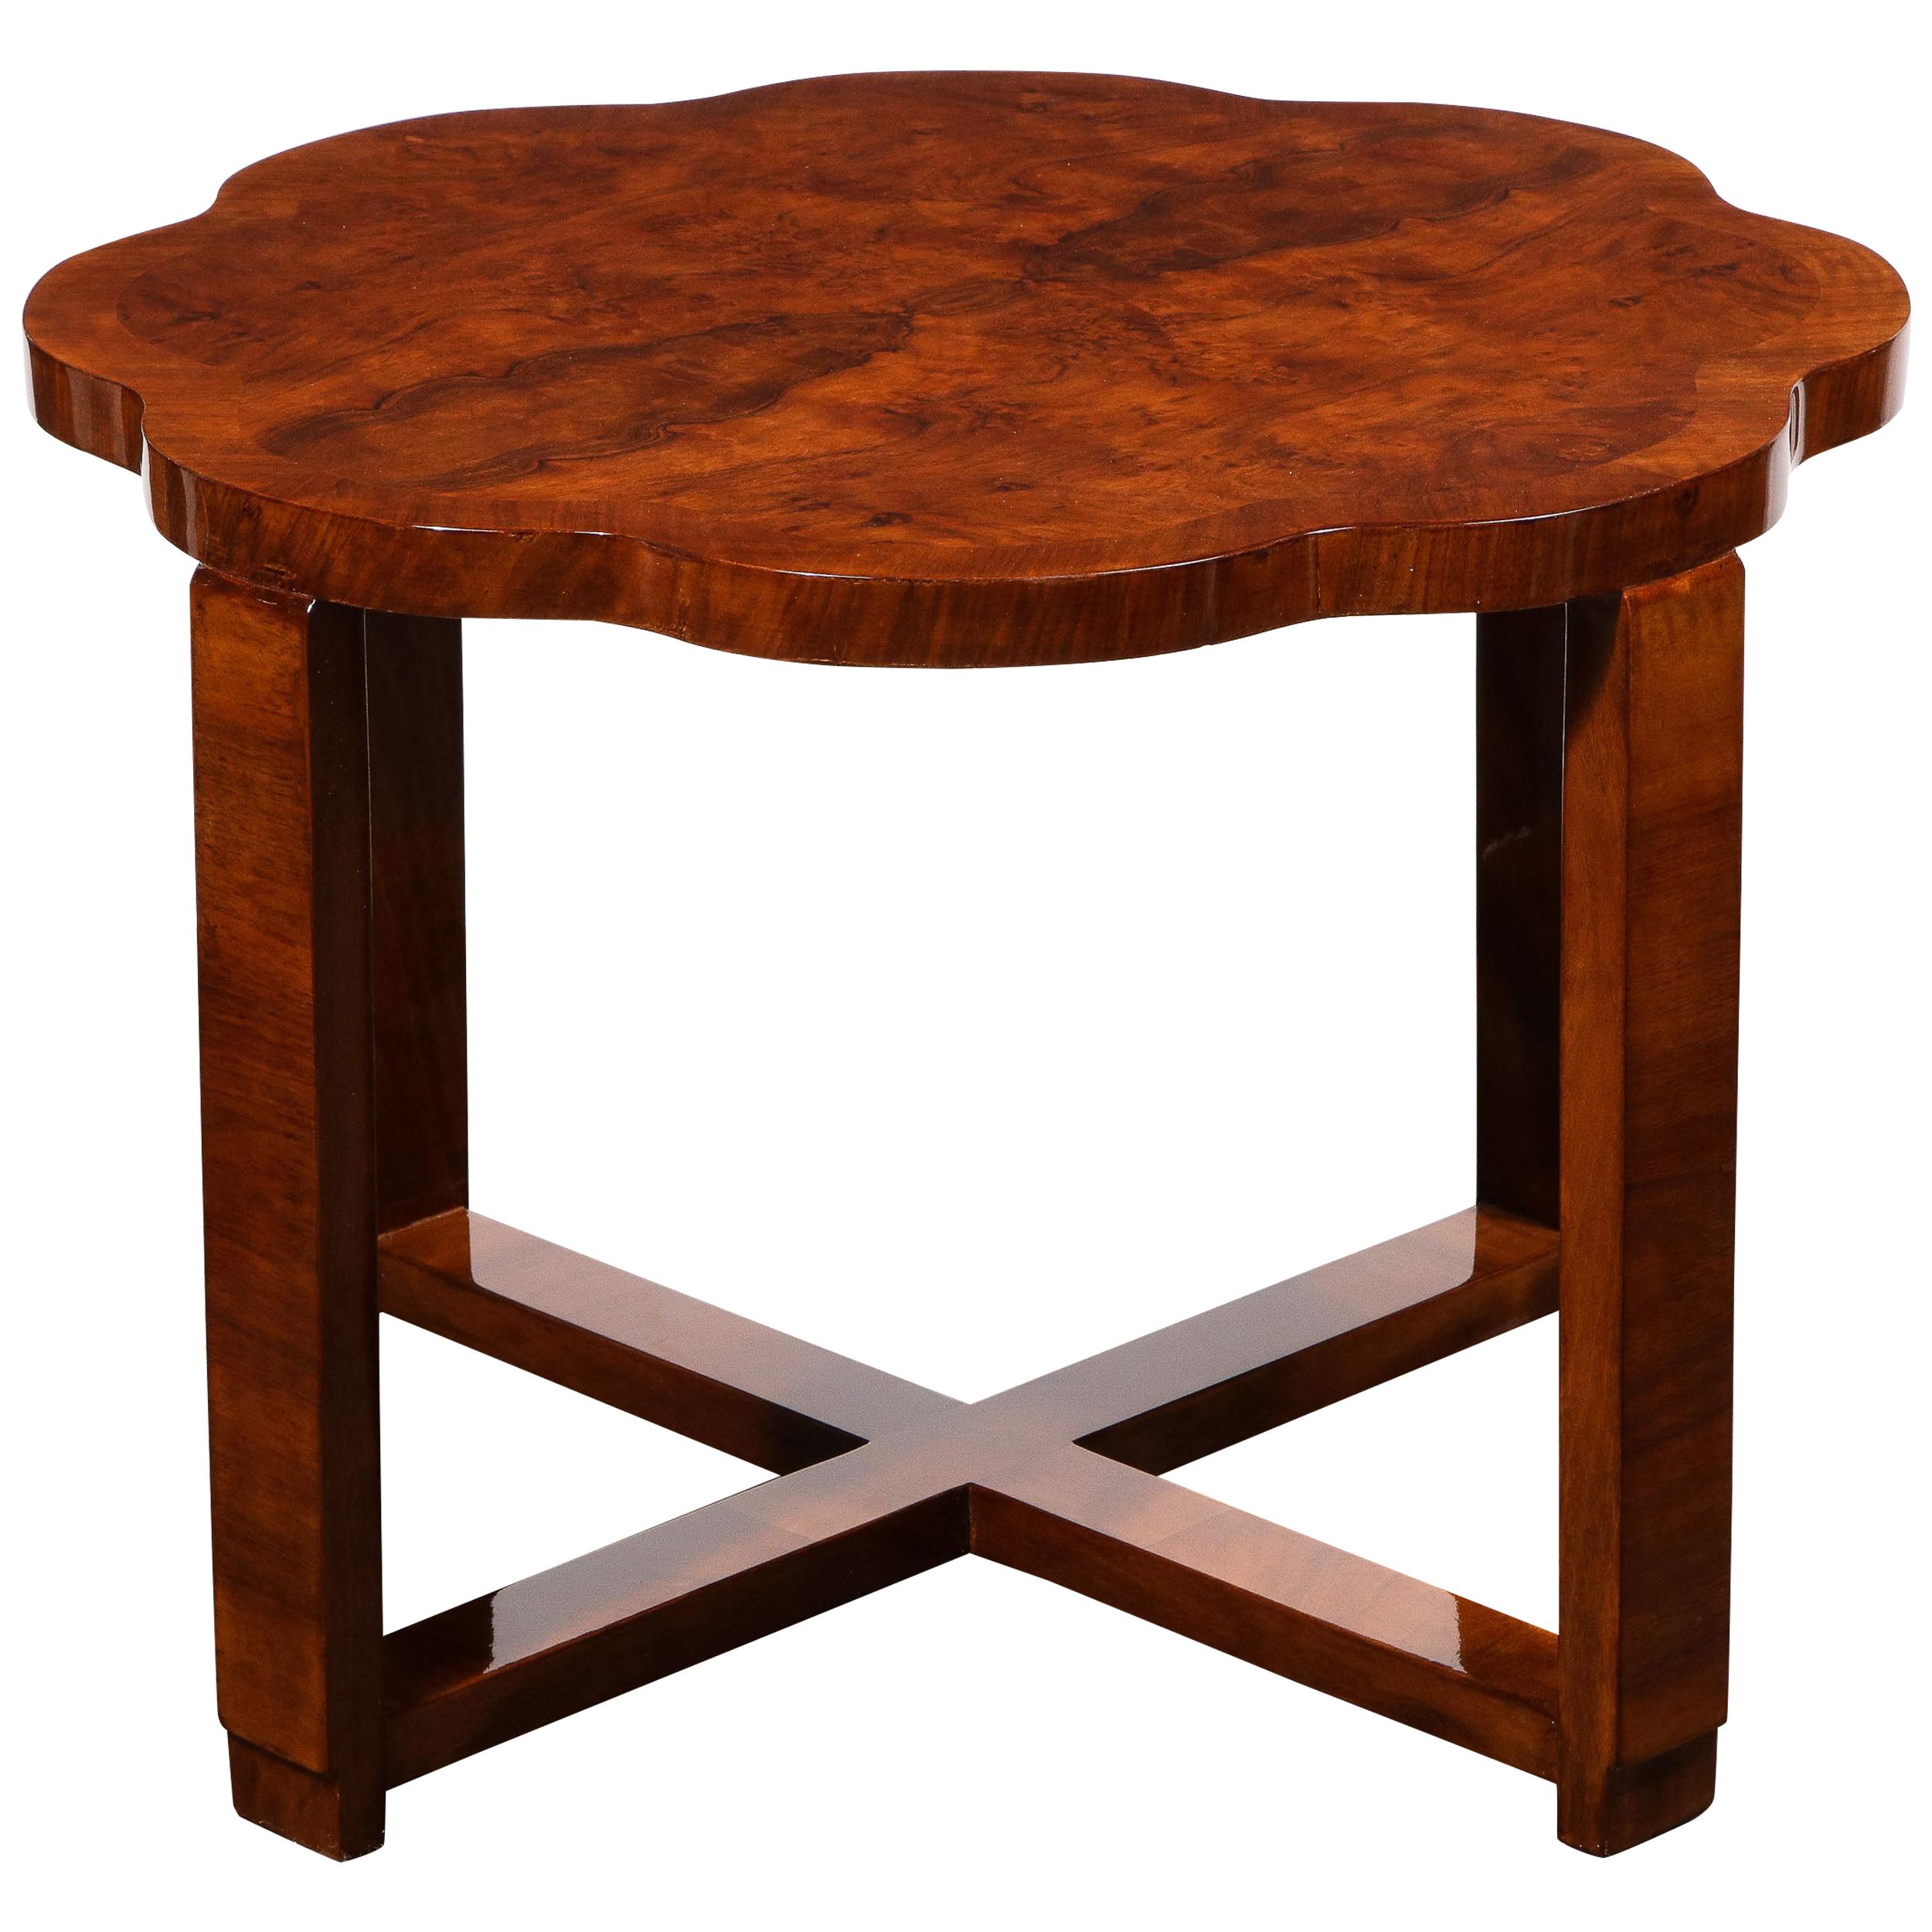 French Art Deco Bookmatched and Burled Walnut "Cloud Style" Guéridon Table